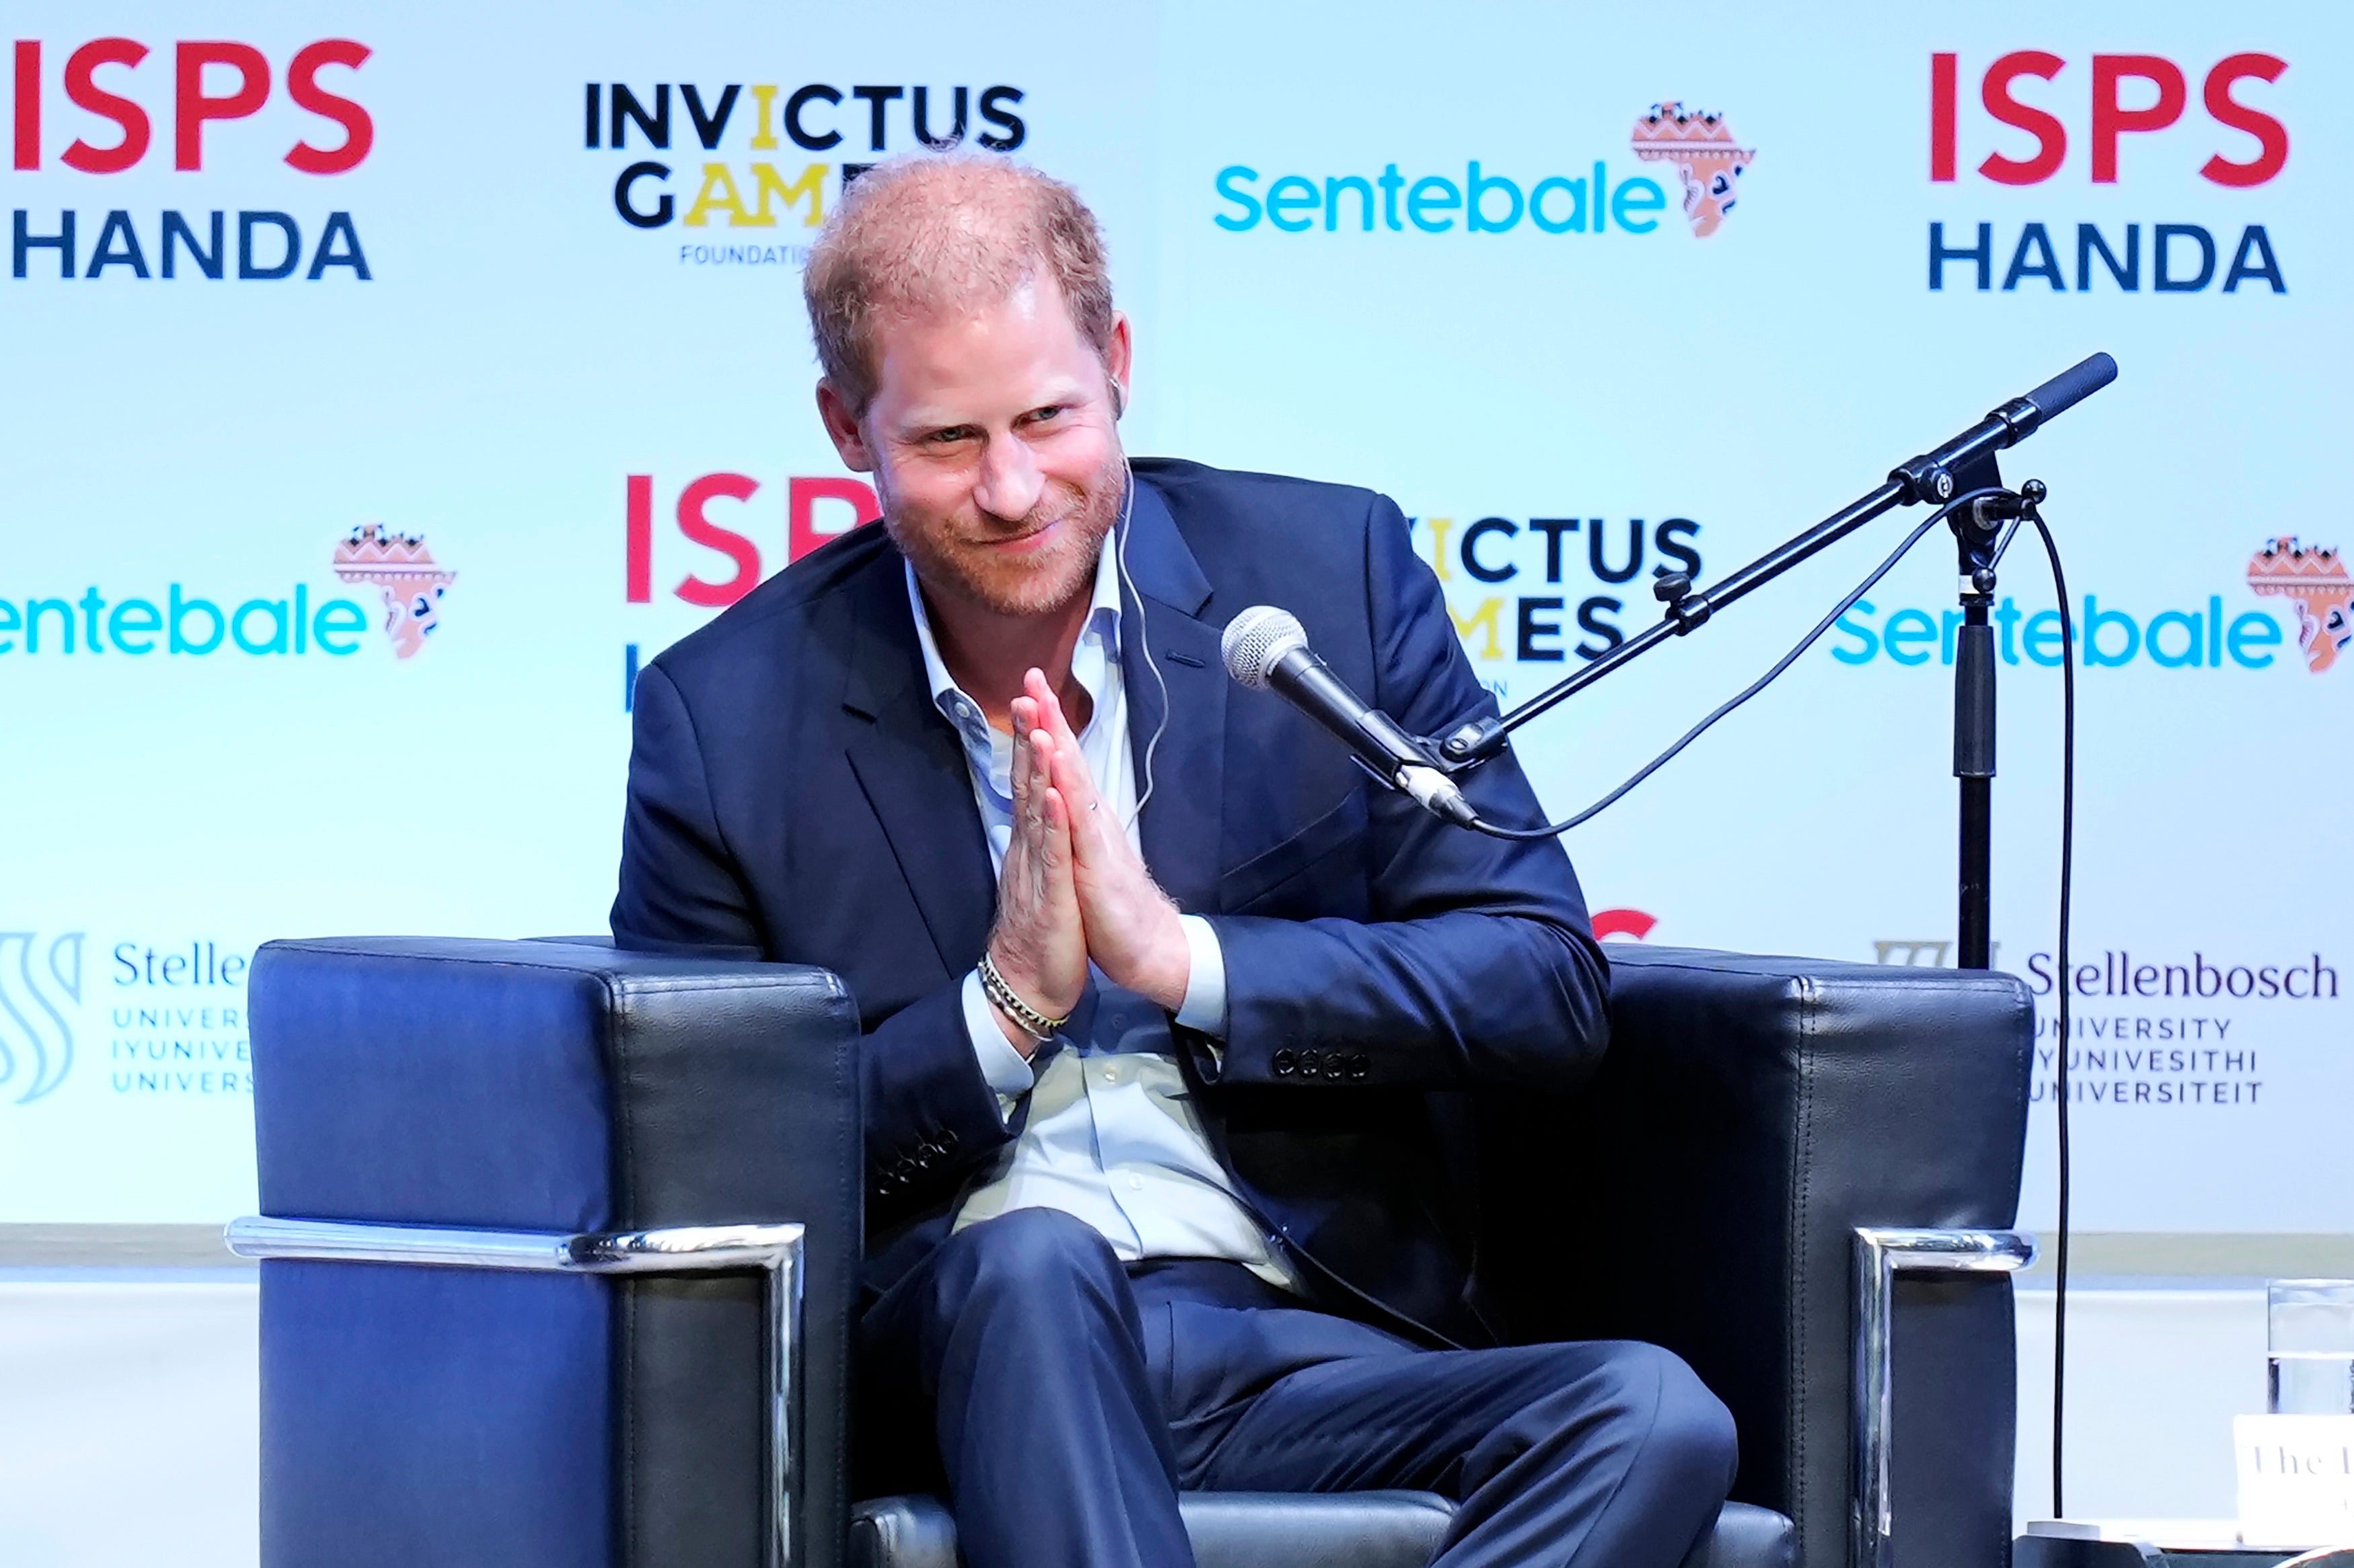 Prince Harry gestures as he speaks during an event organized by the International Sports Promotion Society (ISPS) Wednesday, Aug. 9, 2023